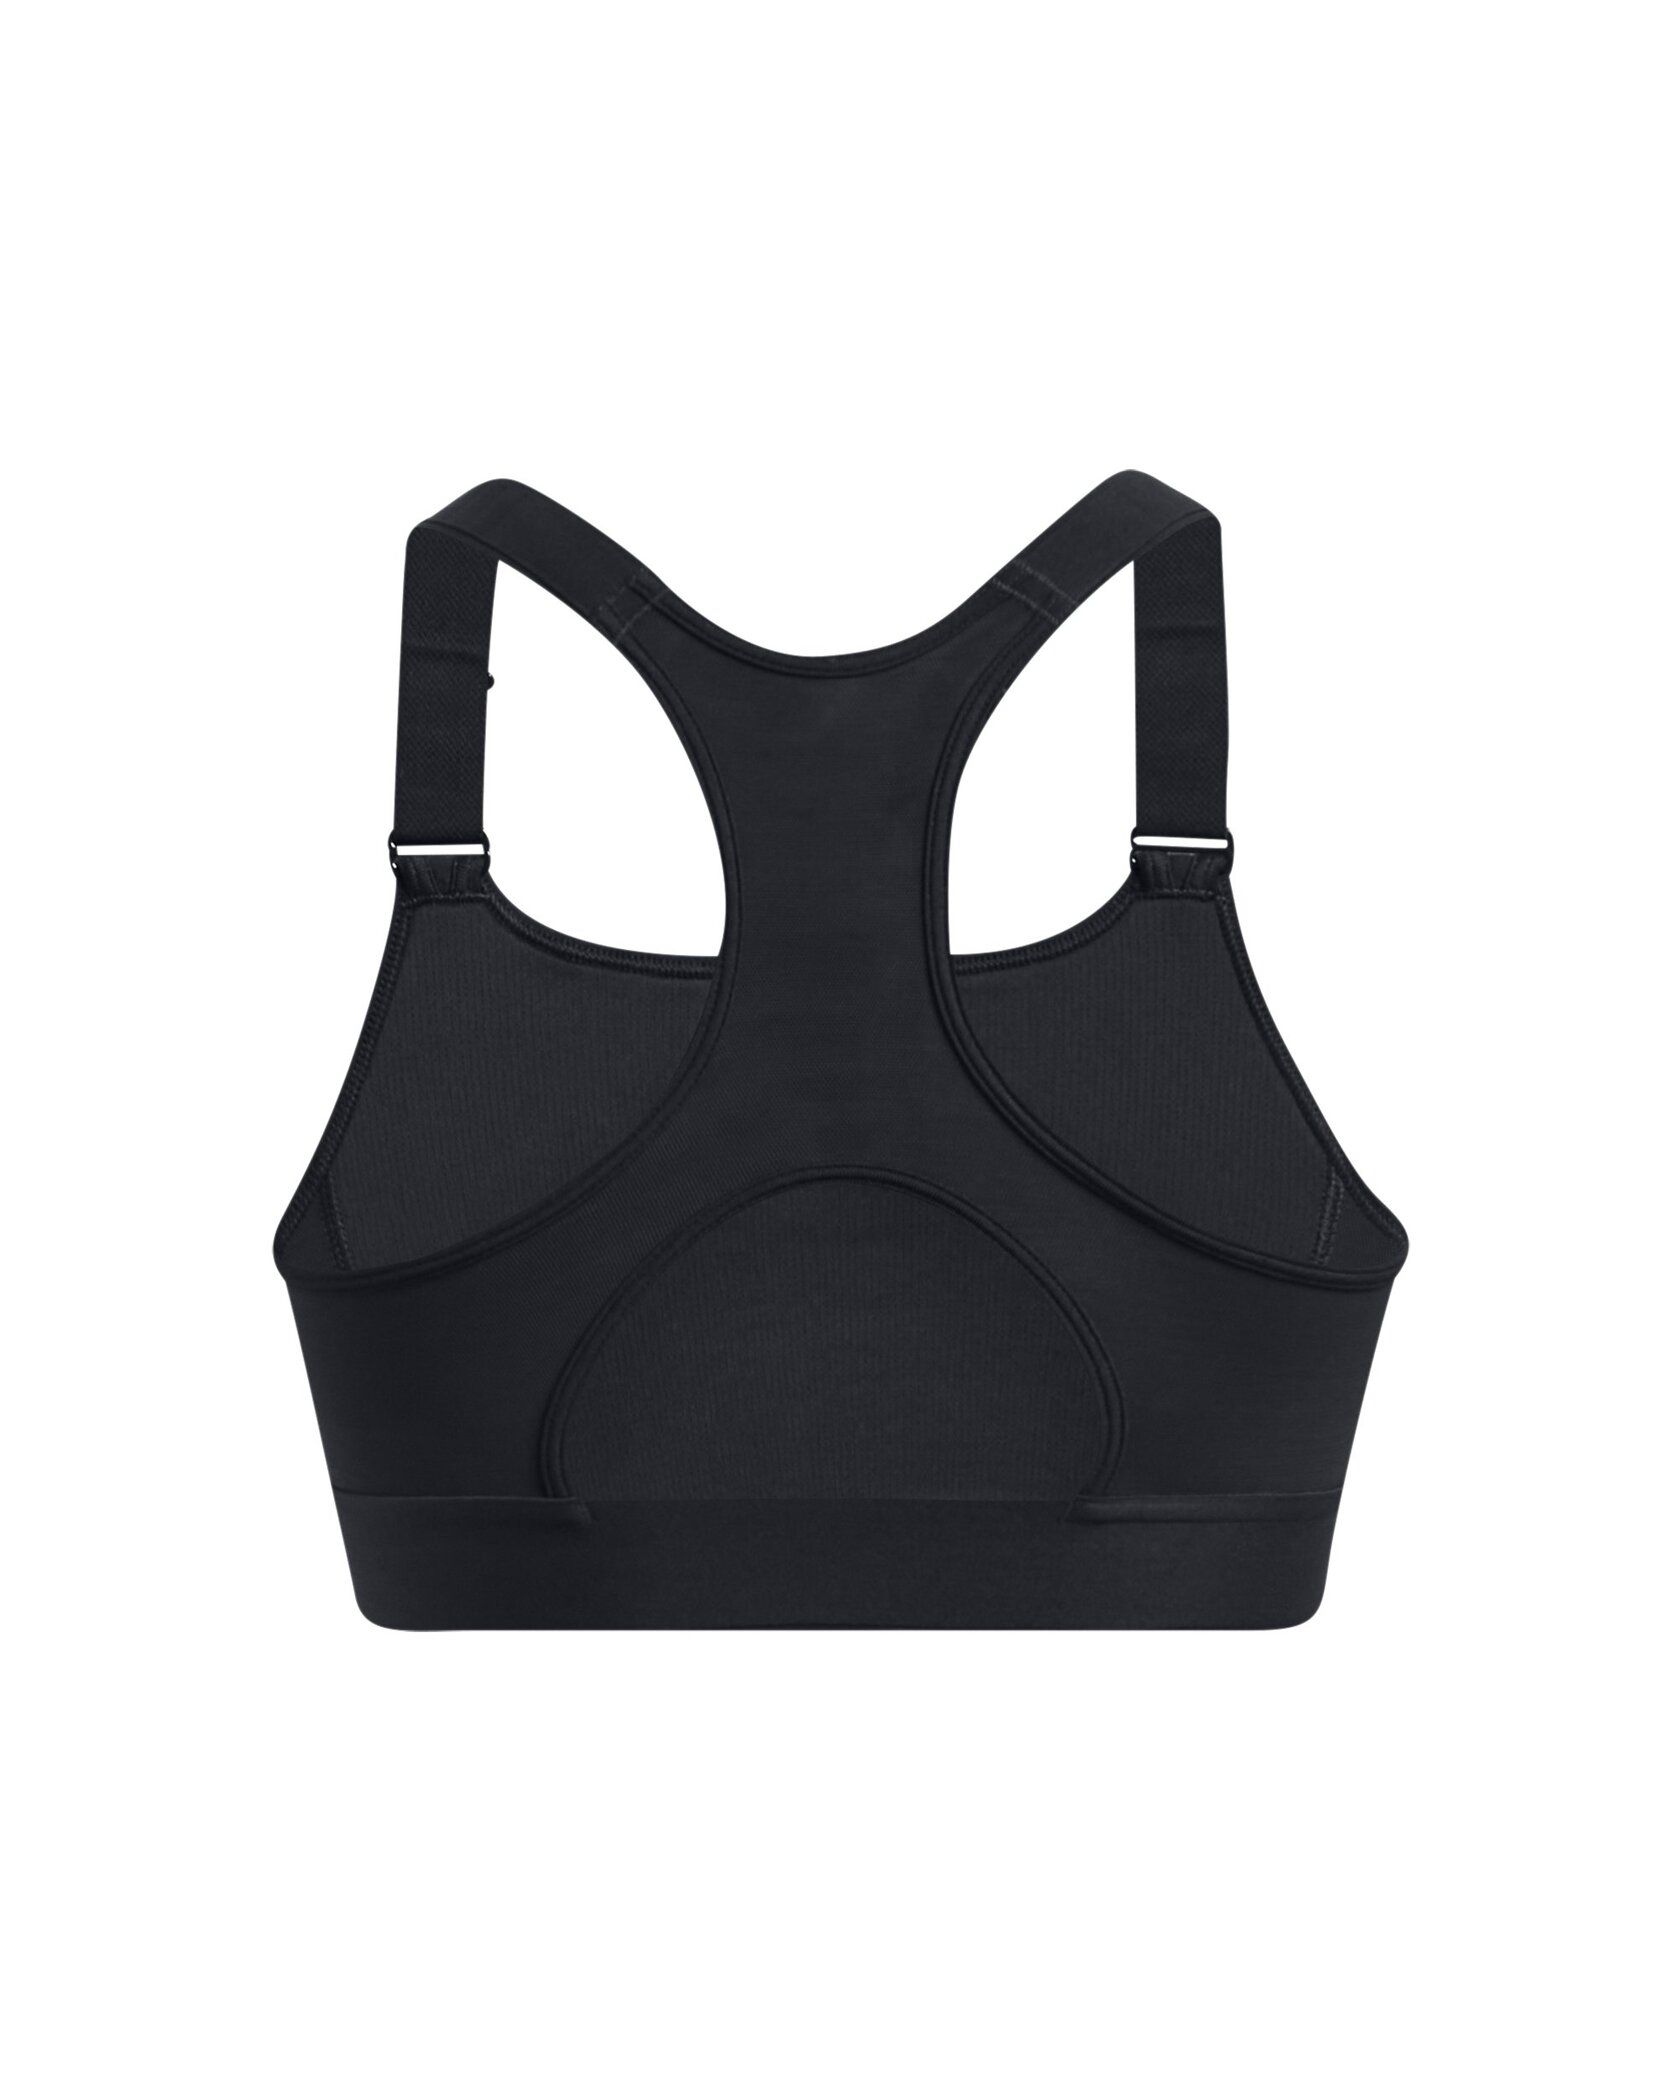 Under Armour Reflect High Impact Sports Bra Sz XS MSRP $50 Style